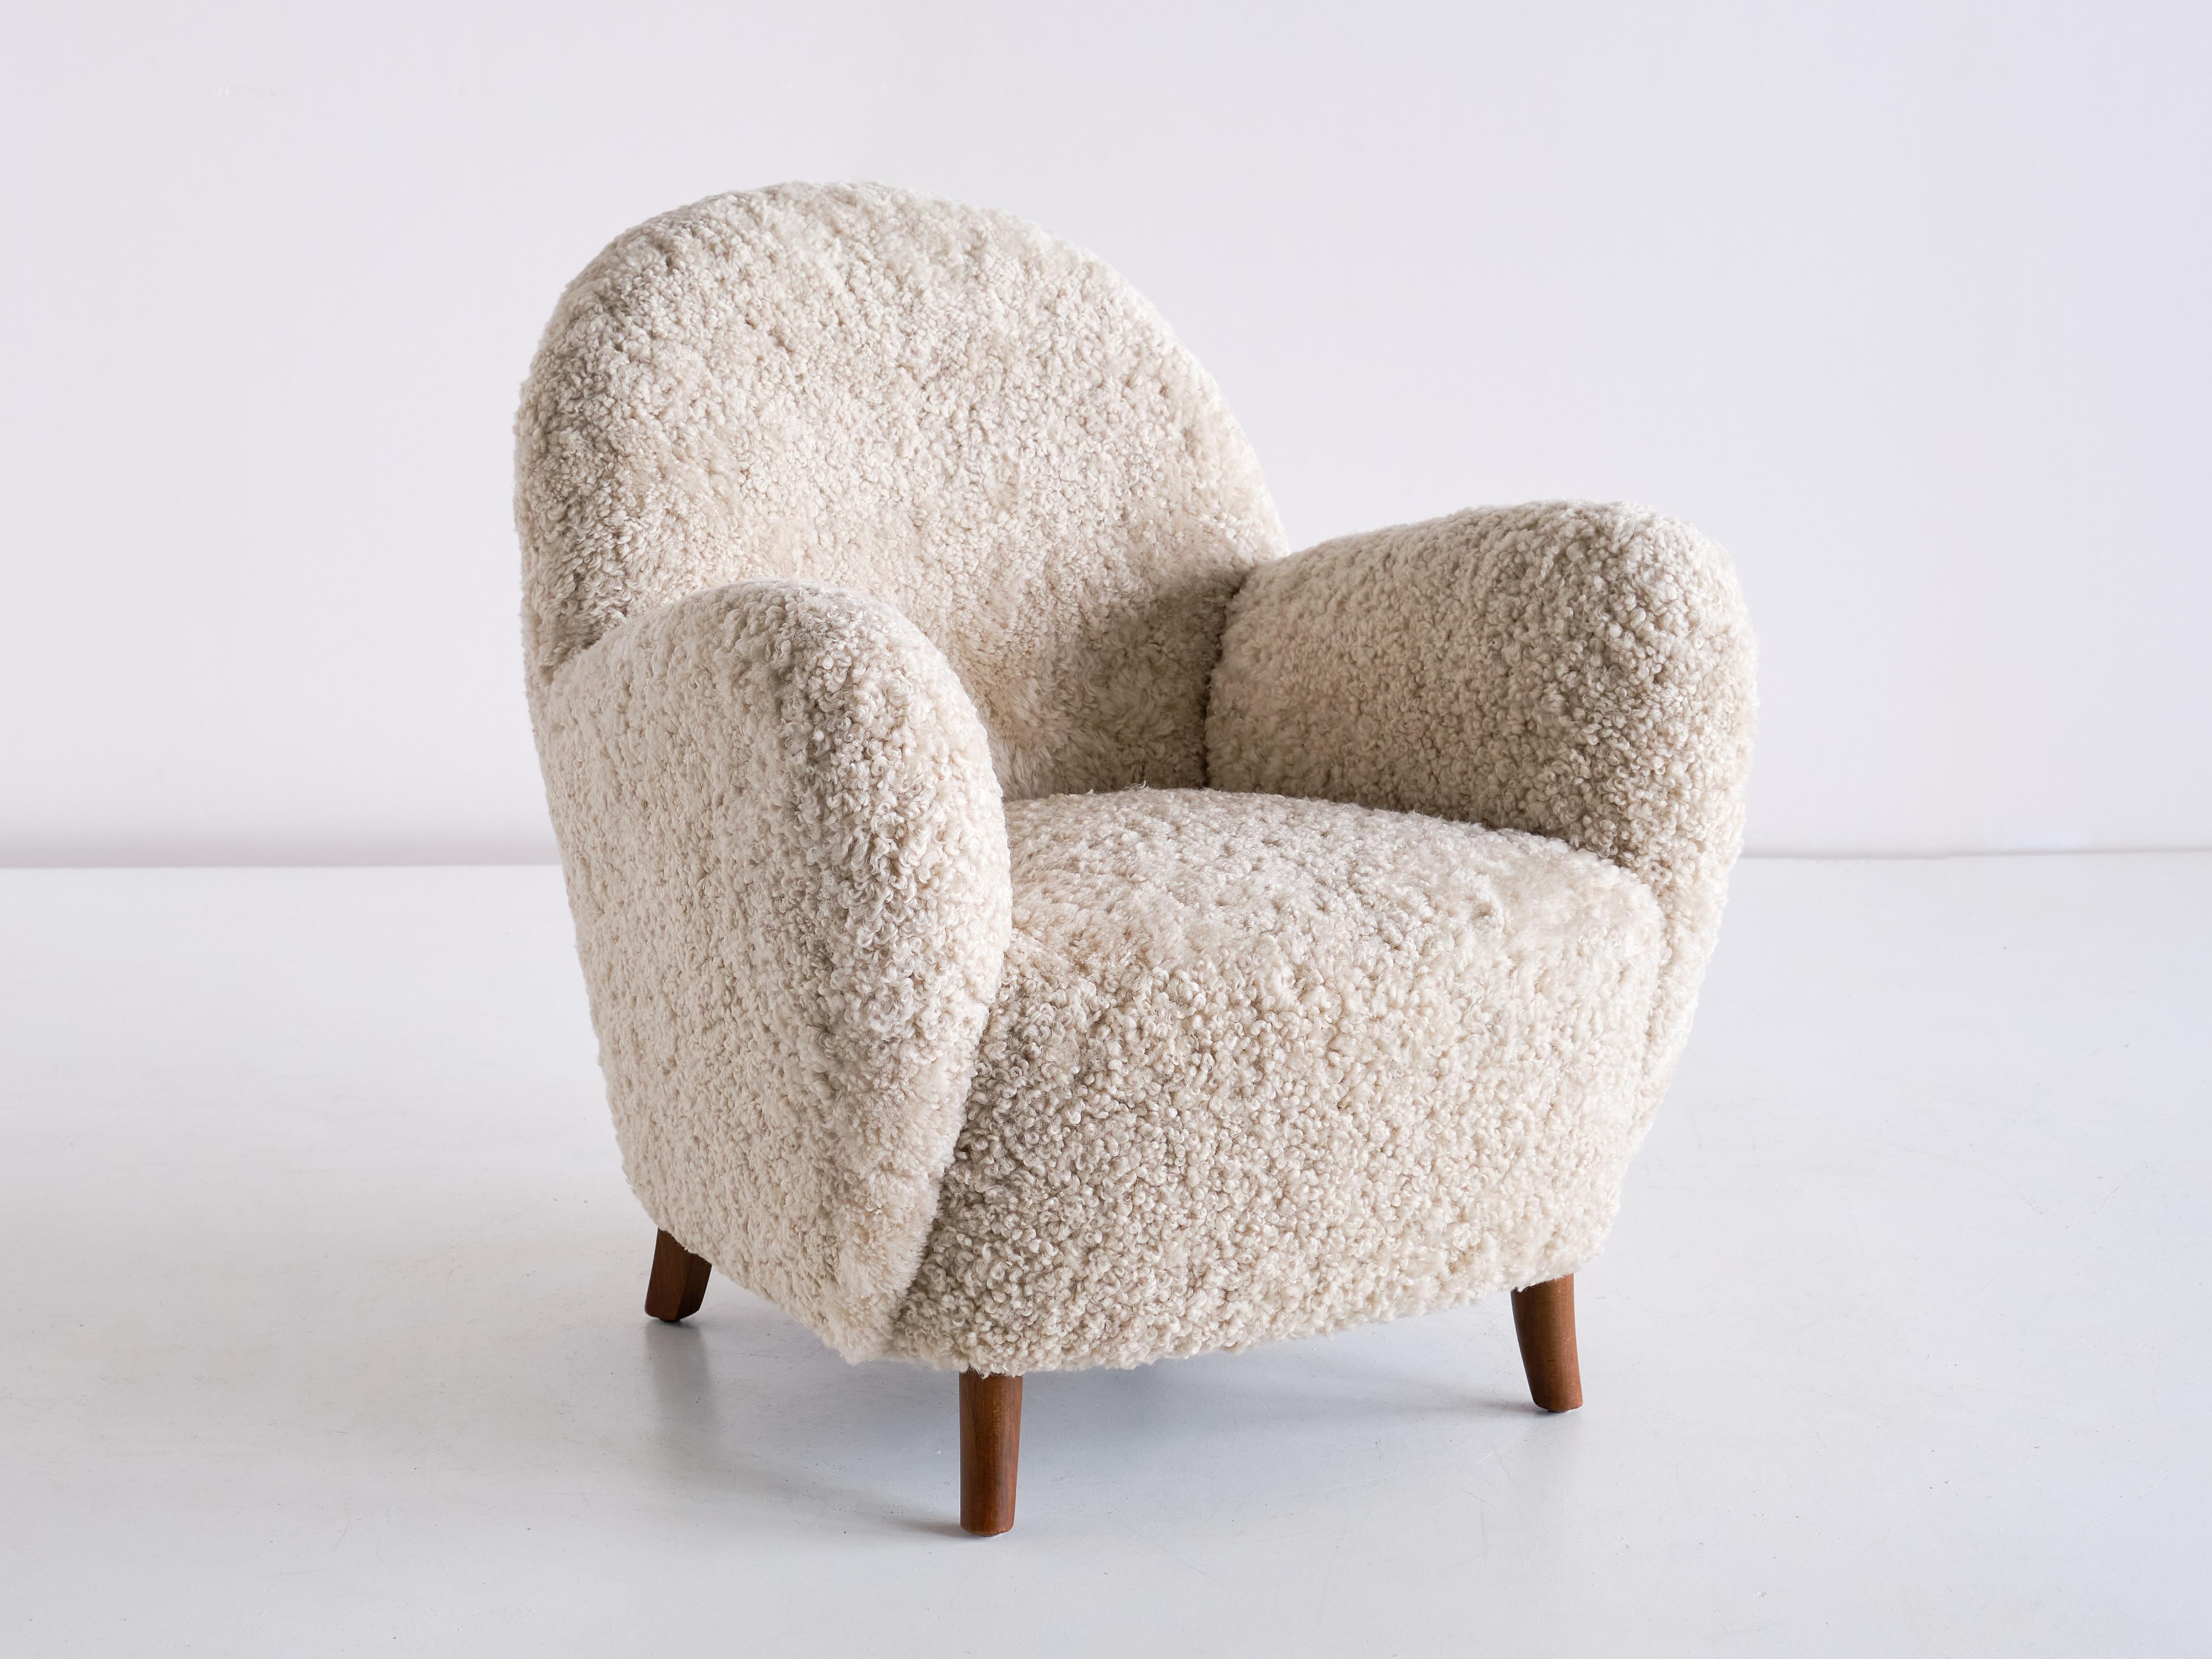 Mid-20th Century Pair of Thorald Madsen Armchairs in Sheepskin and Beech, Denmark, Mid 1930s For Sale